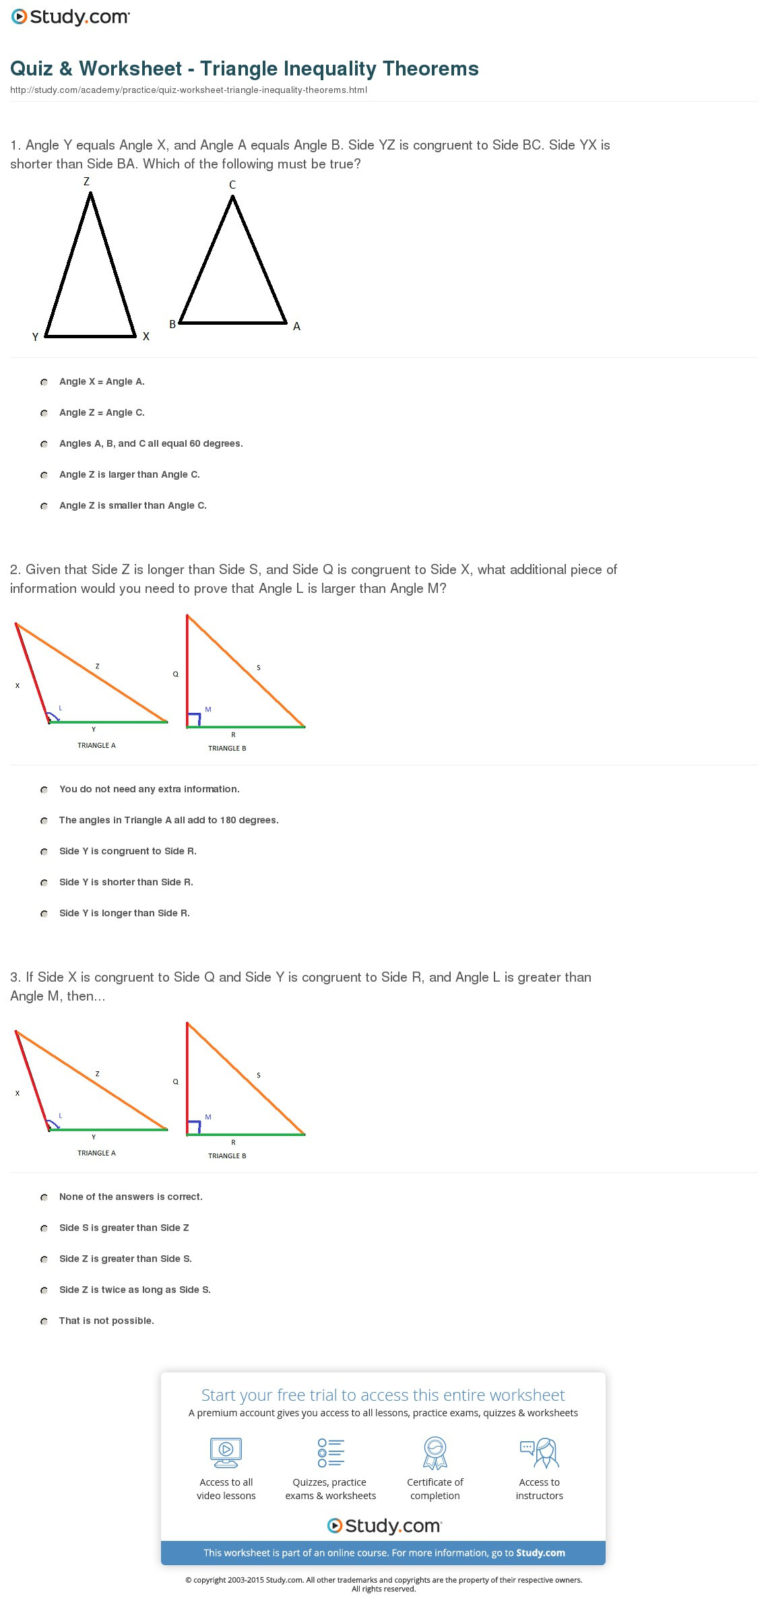 quiz-worksheet-triangle-inequality-theorems-study-db-excel